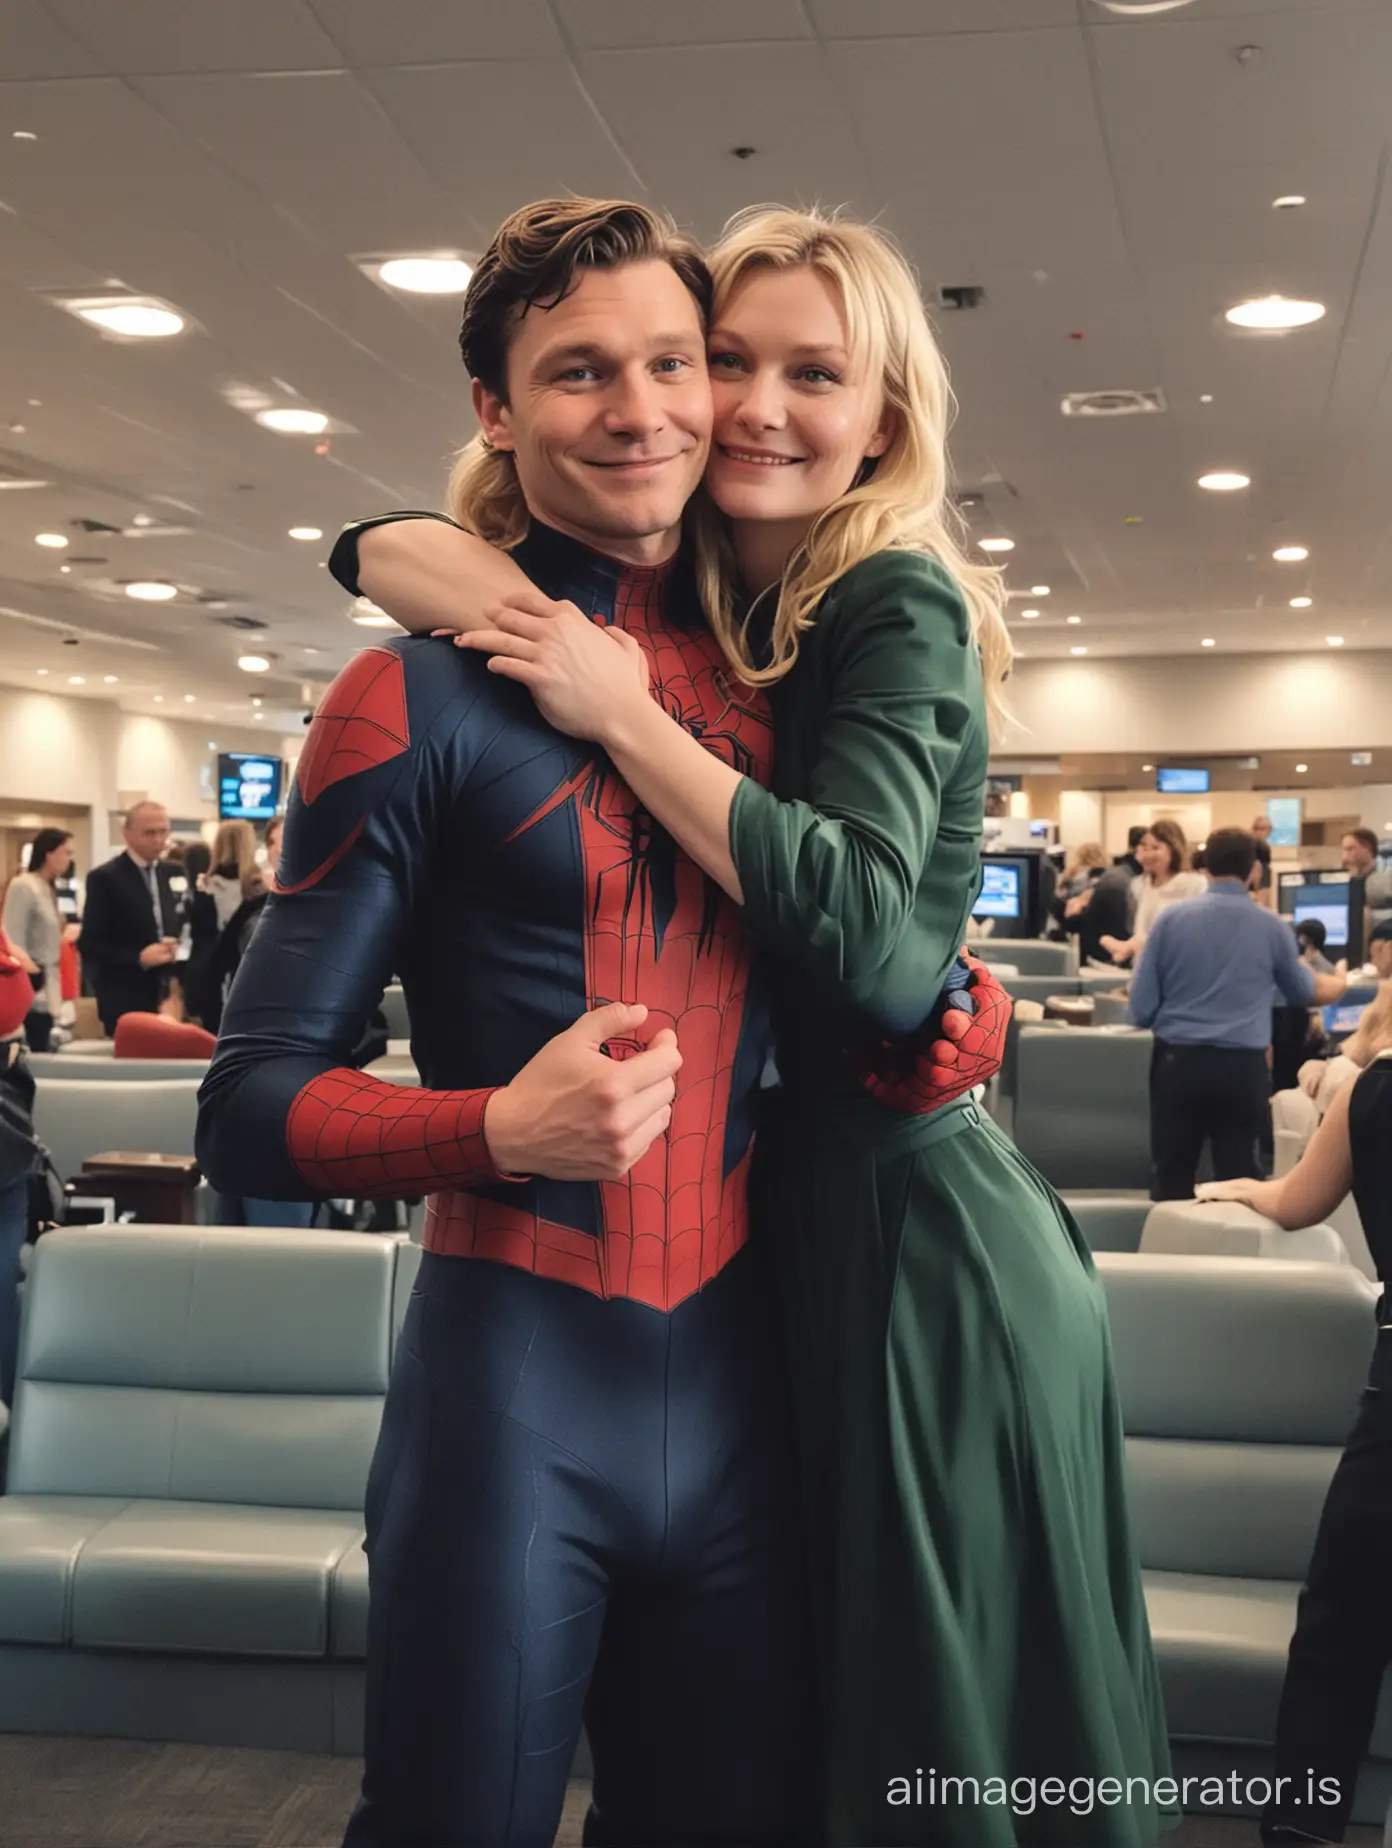 kirsten dunst and spiderman, hugging and smiling, security camera view, airport lounge